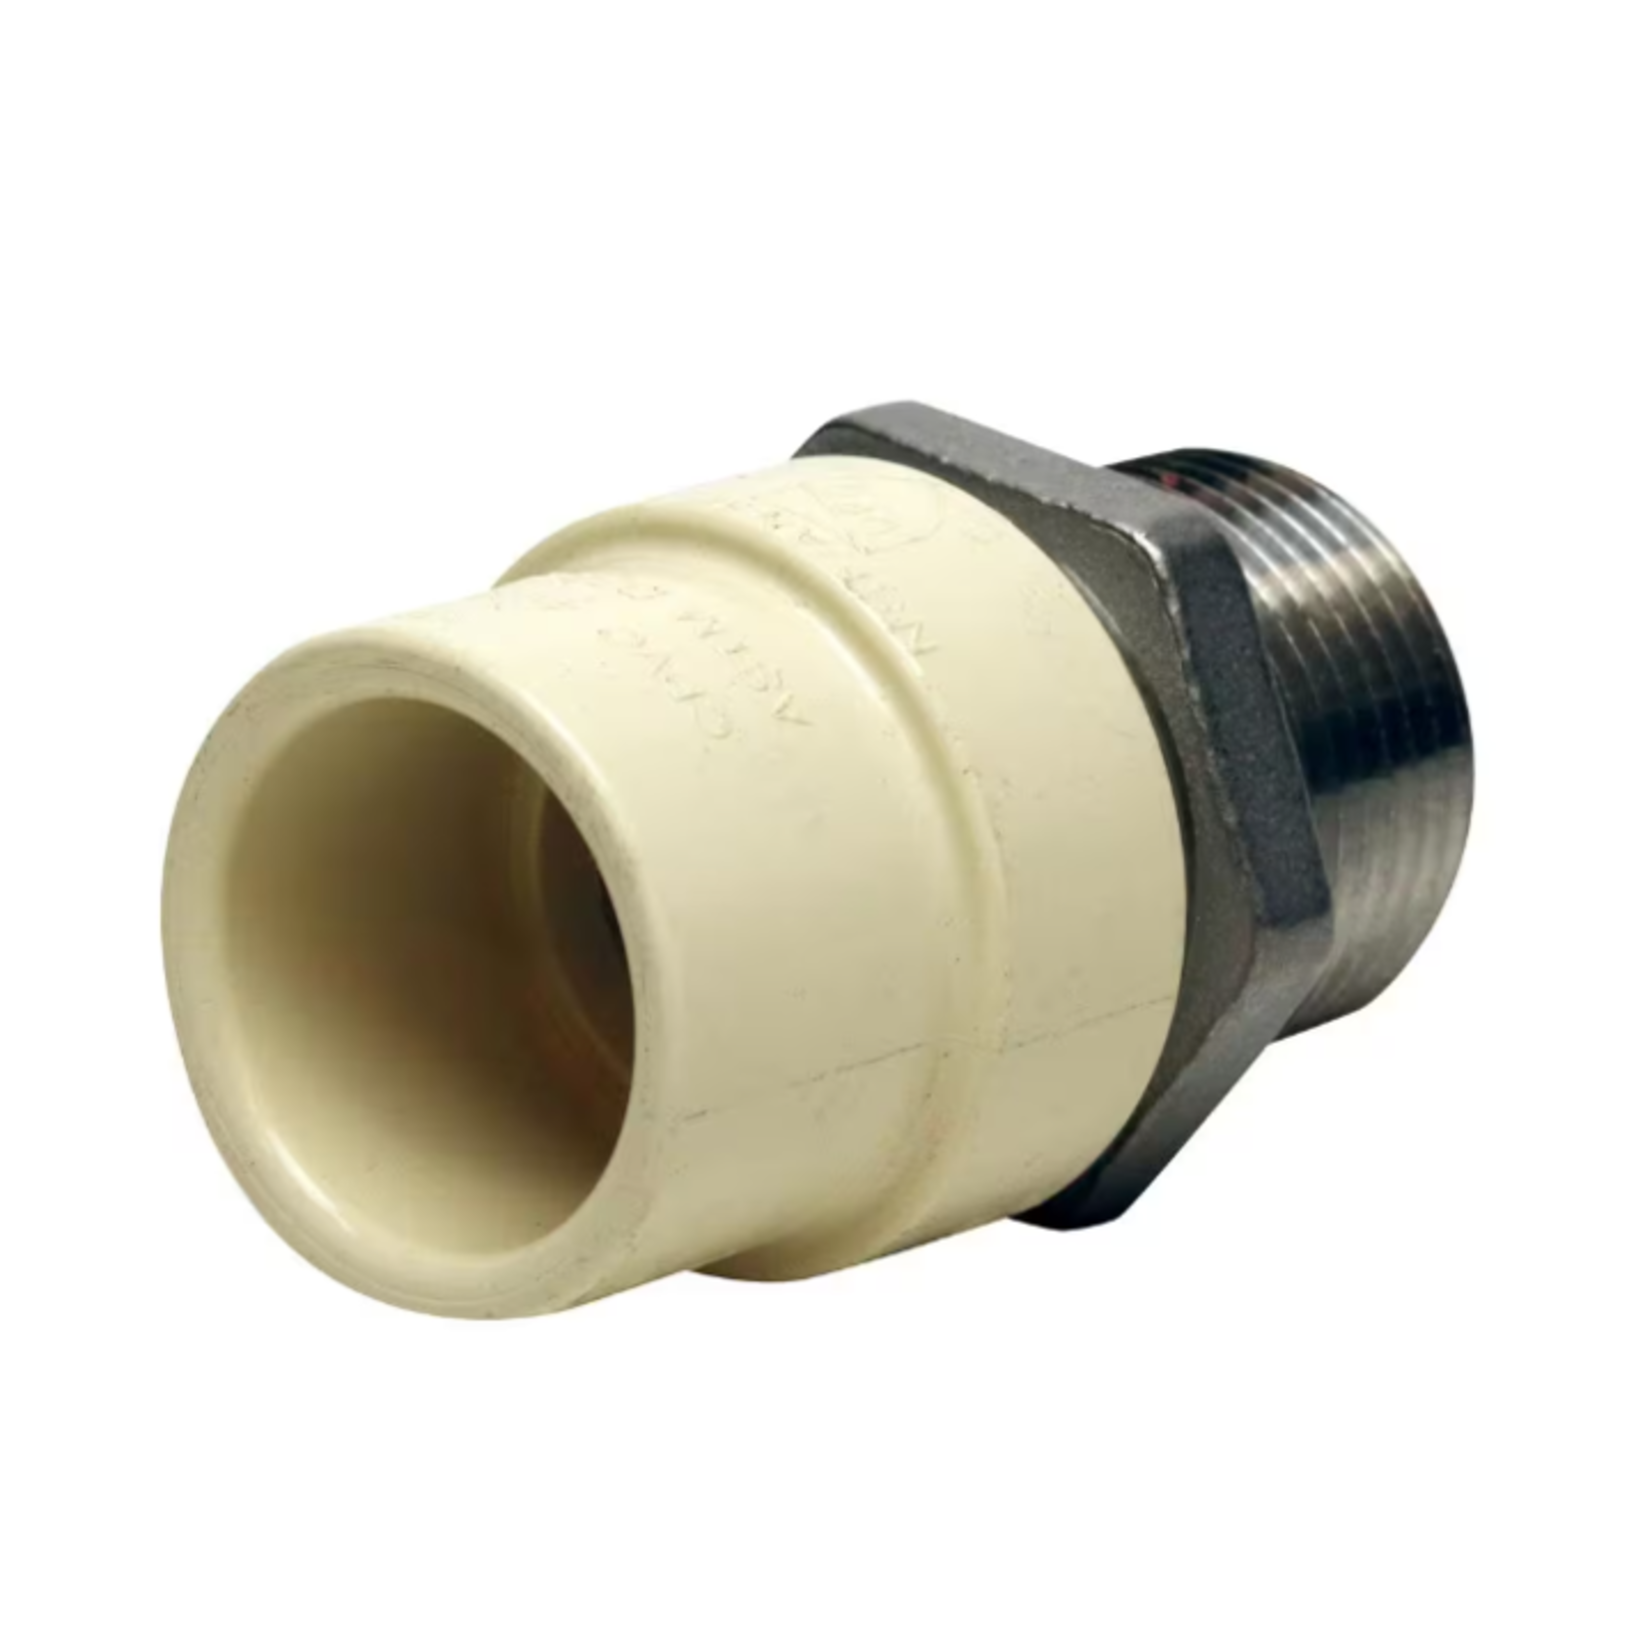 BLUEFIN 3/4 IN CPVC SCHEDULE 40 X STAINLESS STEEL MALE ADAPTER